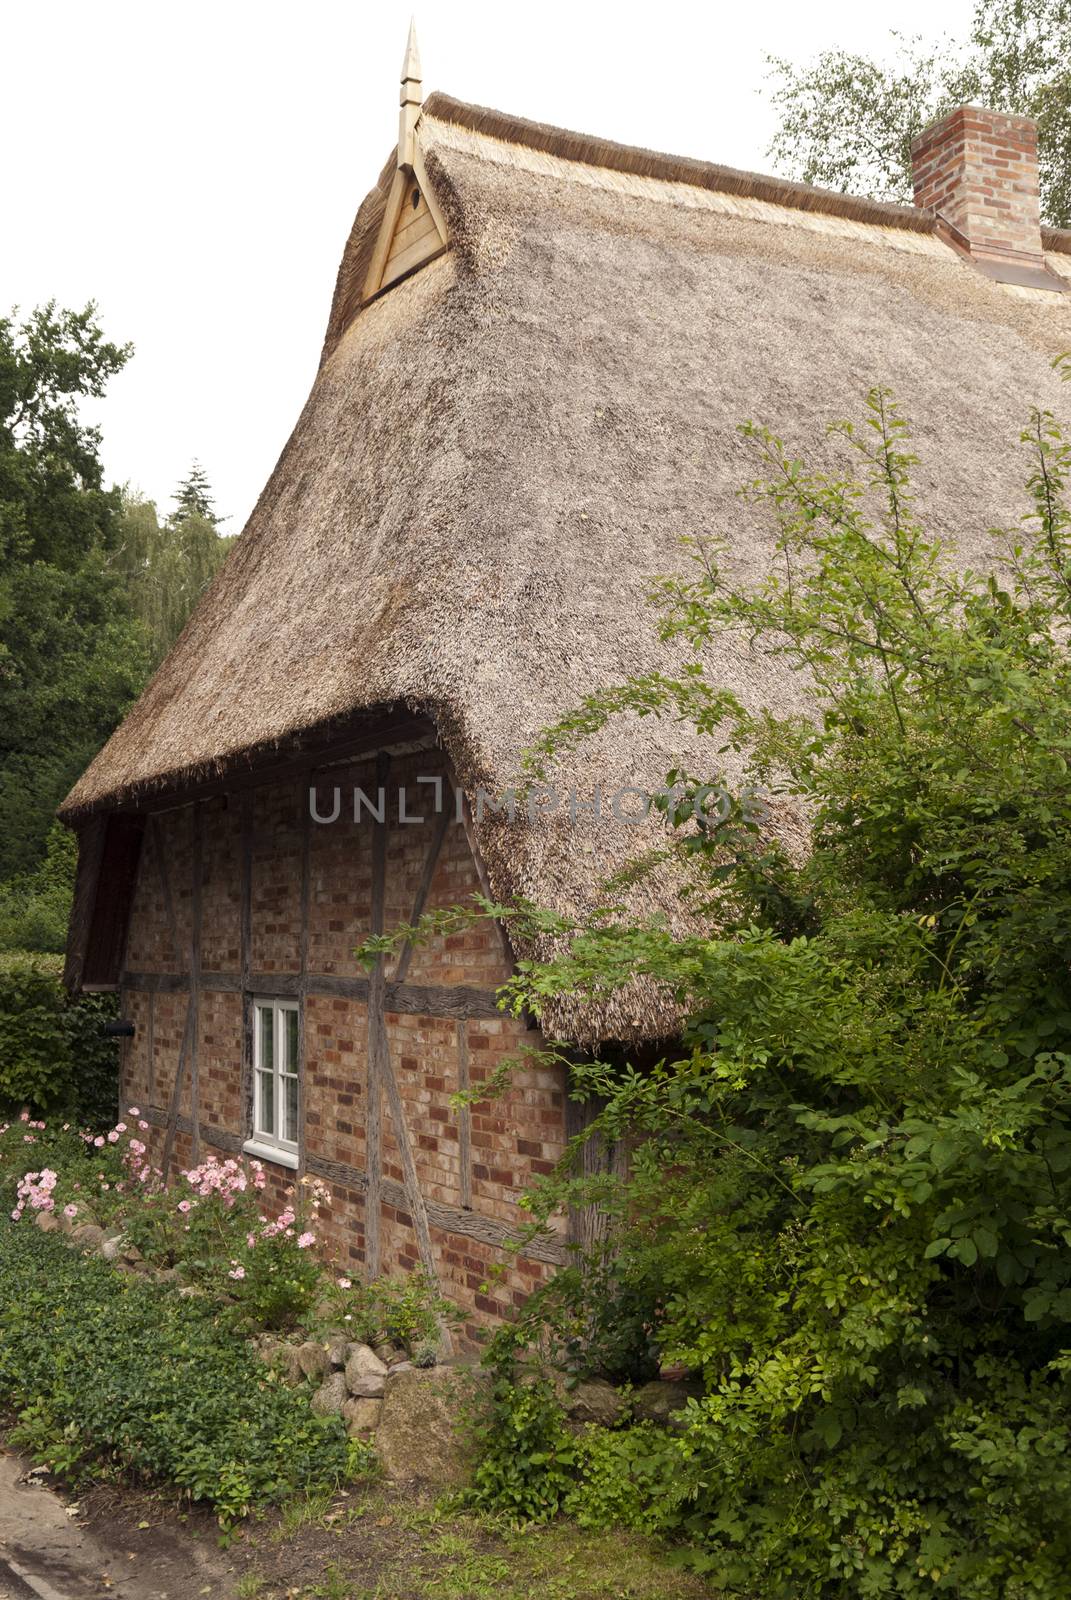 Thatched Roof House in Germany